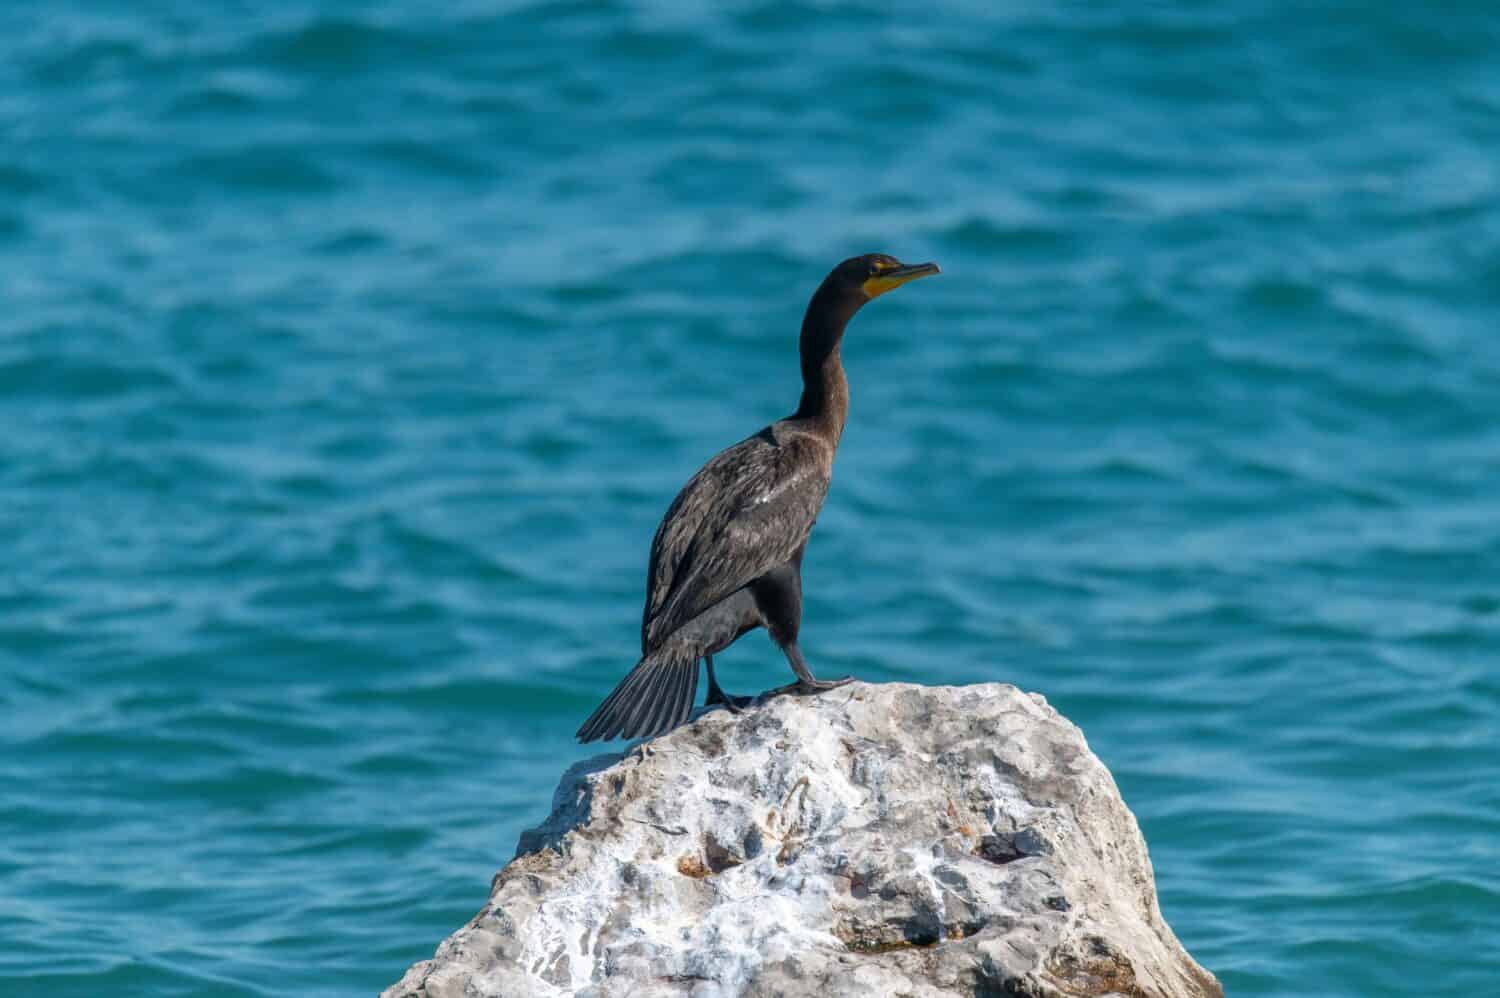 A double-crested cormorant sits on a rock sunning, by the St. Clair River in Port Huron, Michigan.